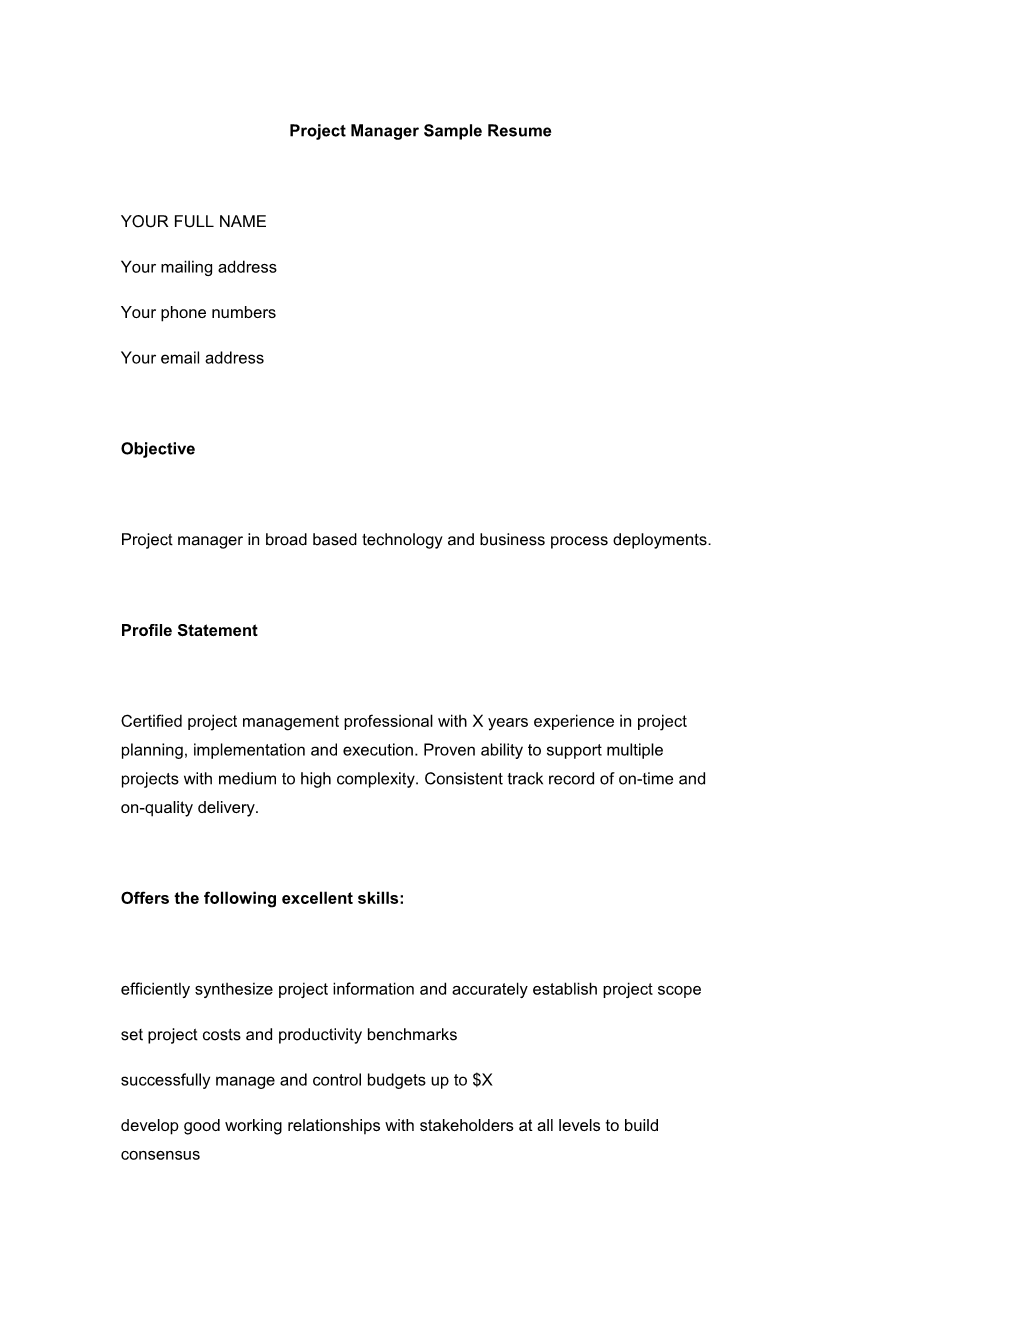 Project Manager Sample Resume